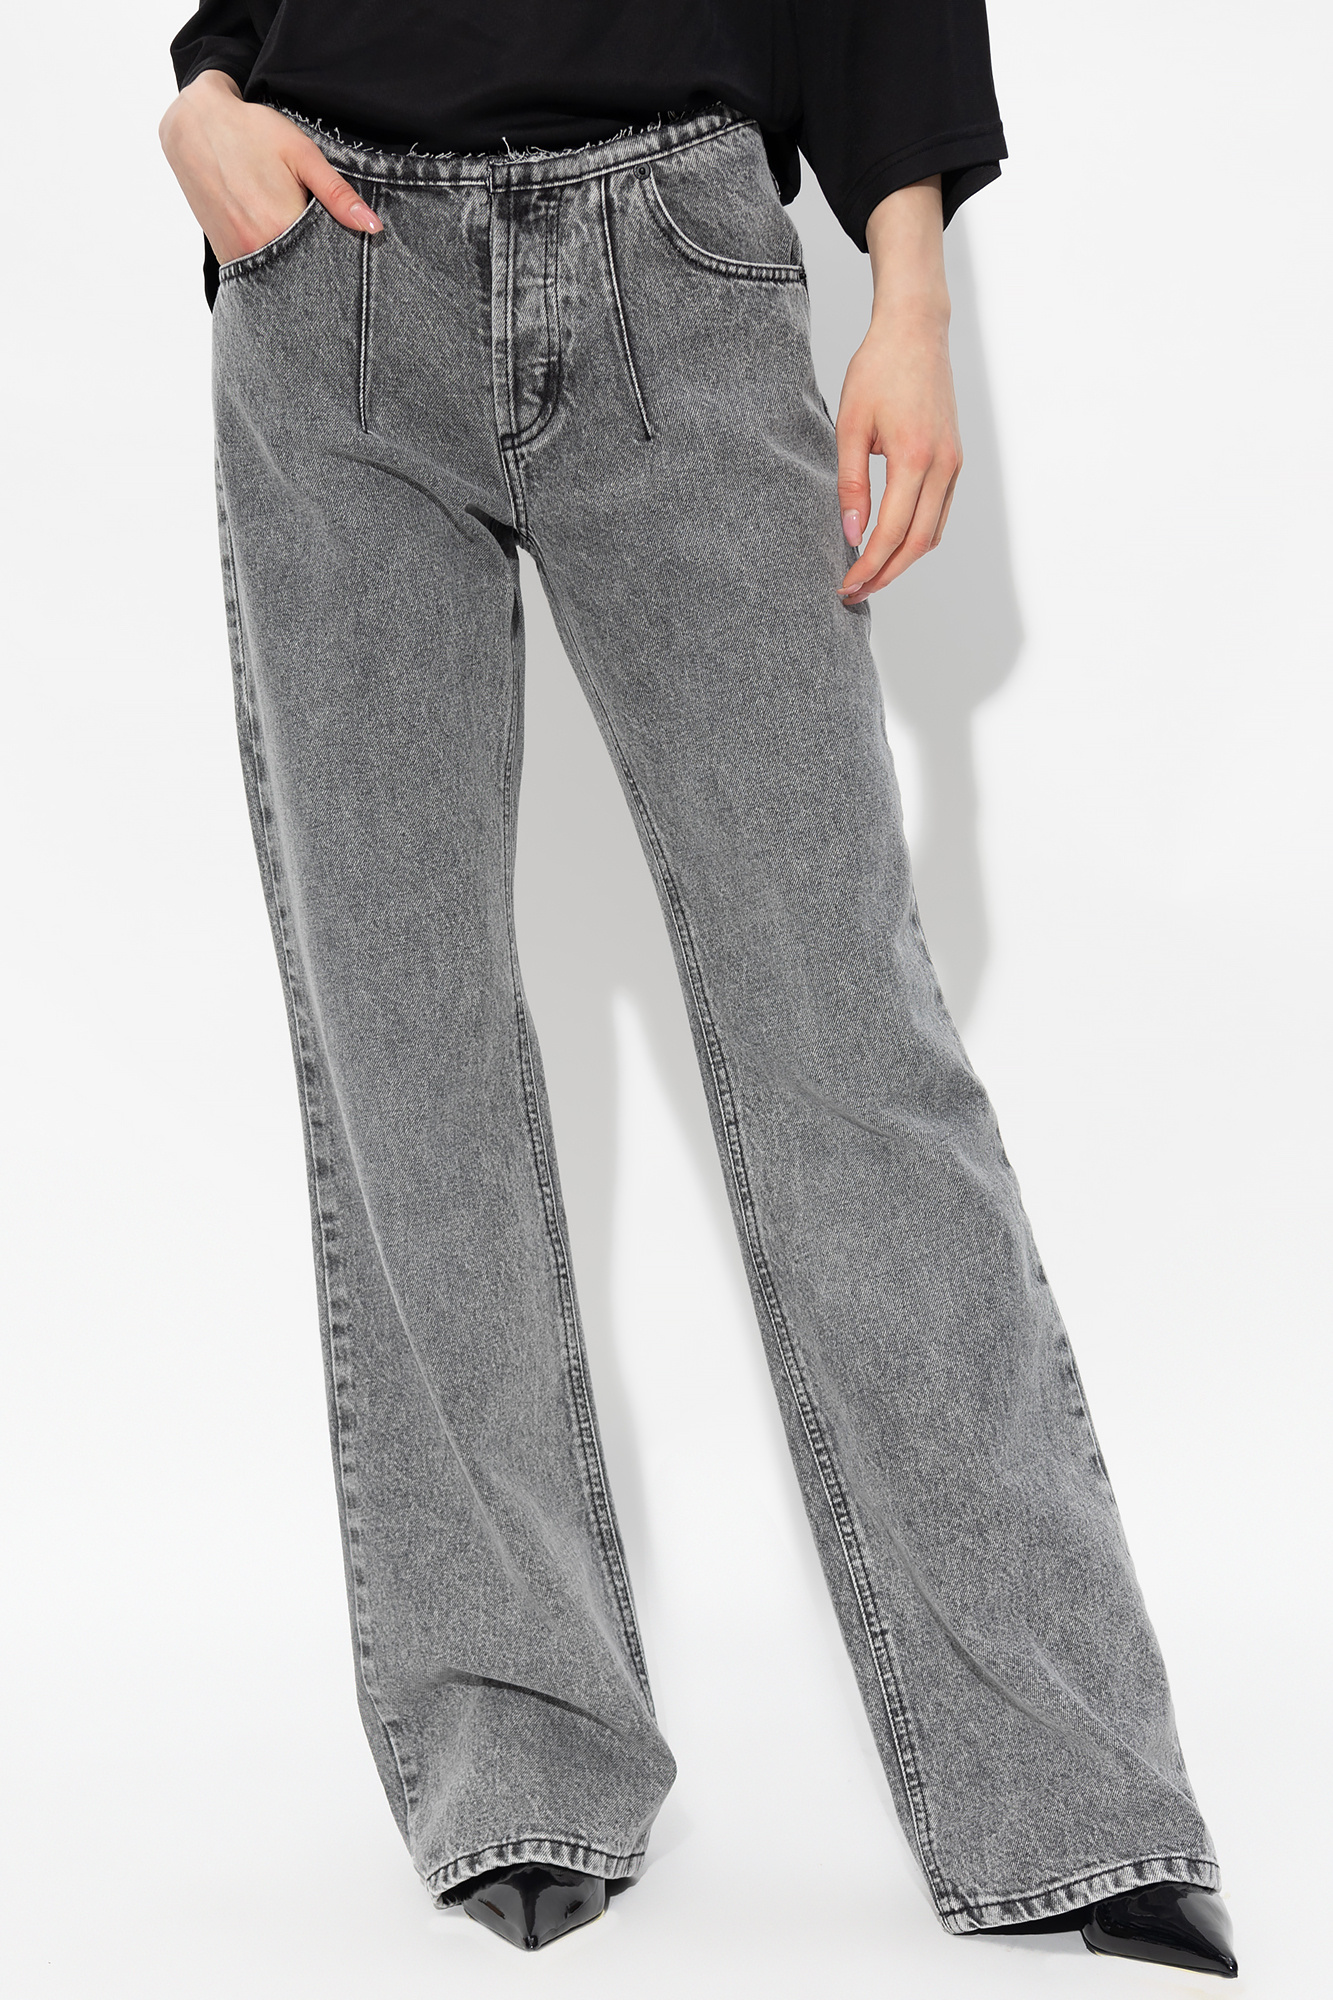 The Mannei ‘Greci’ low rise jeans